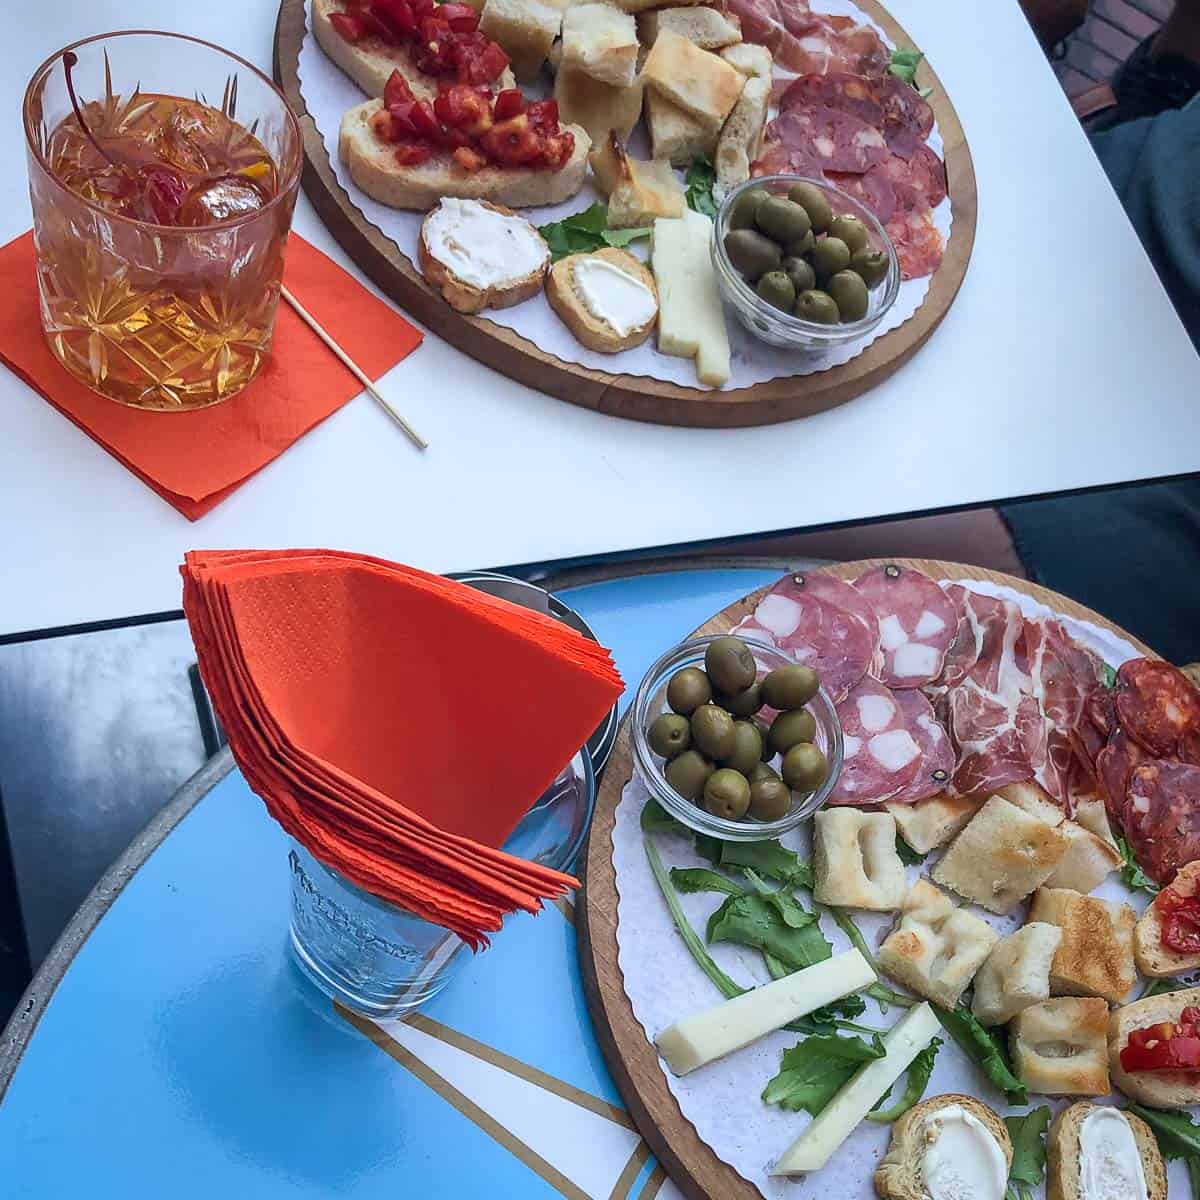 Ligurian focaccia with Aperitivo meats and cheeses and and old fashioned.